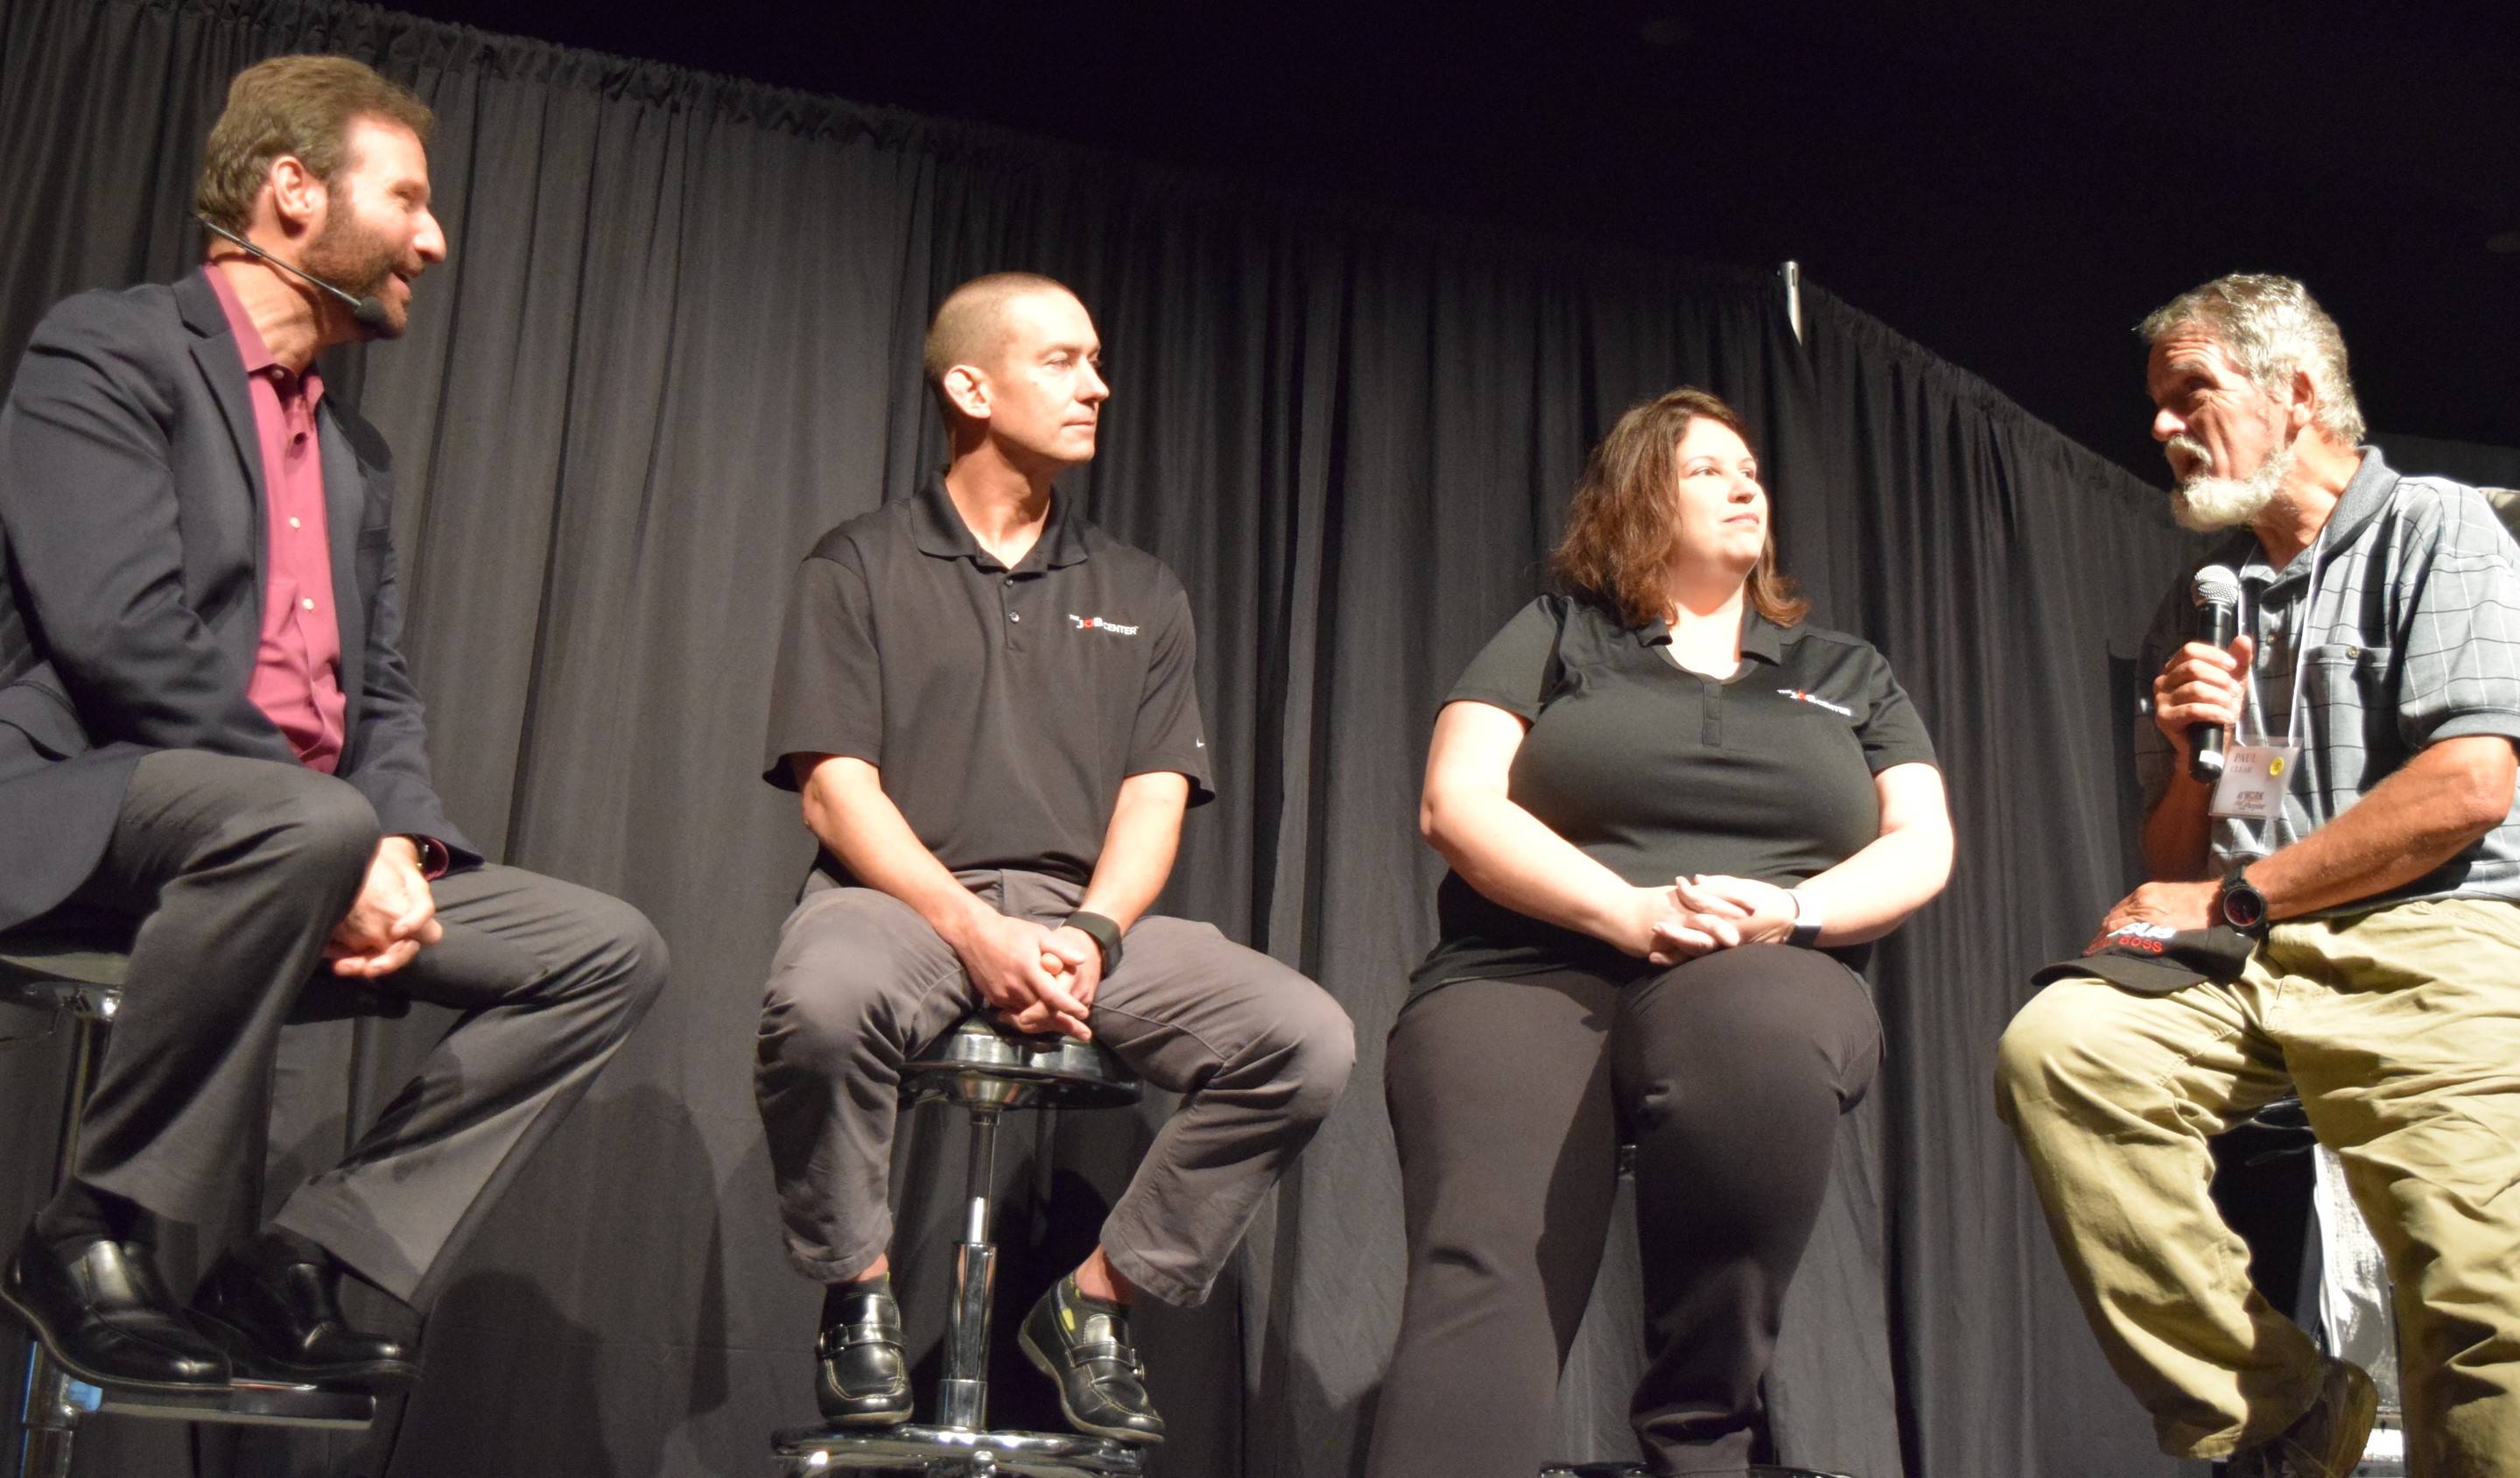 A panel from The Lord’s Gym and The Job Center in Covington, Kentucky explains how collaboration between nonprofits can serve people completely. (Oak Tree Communications Photo)